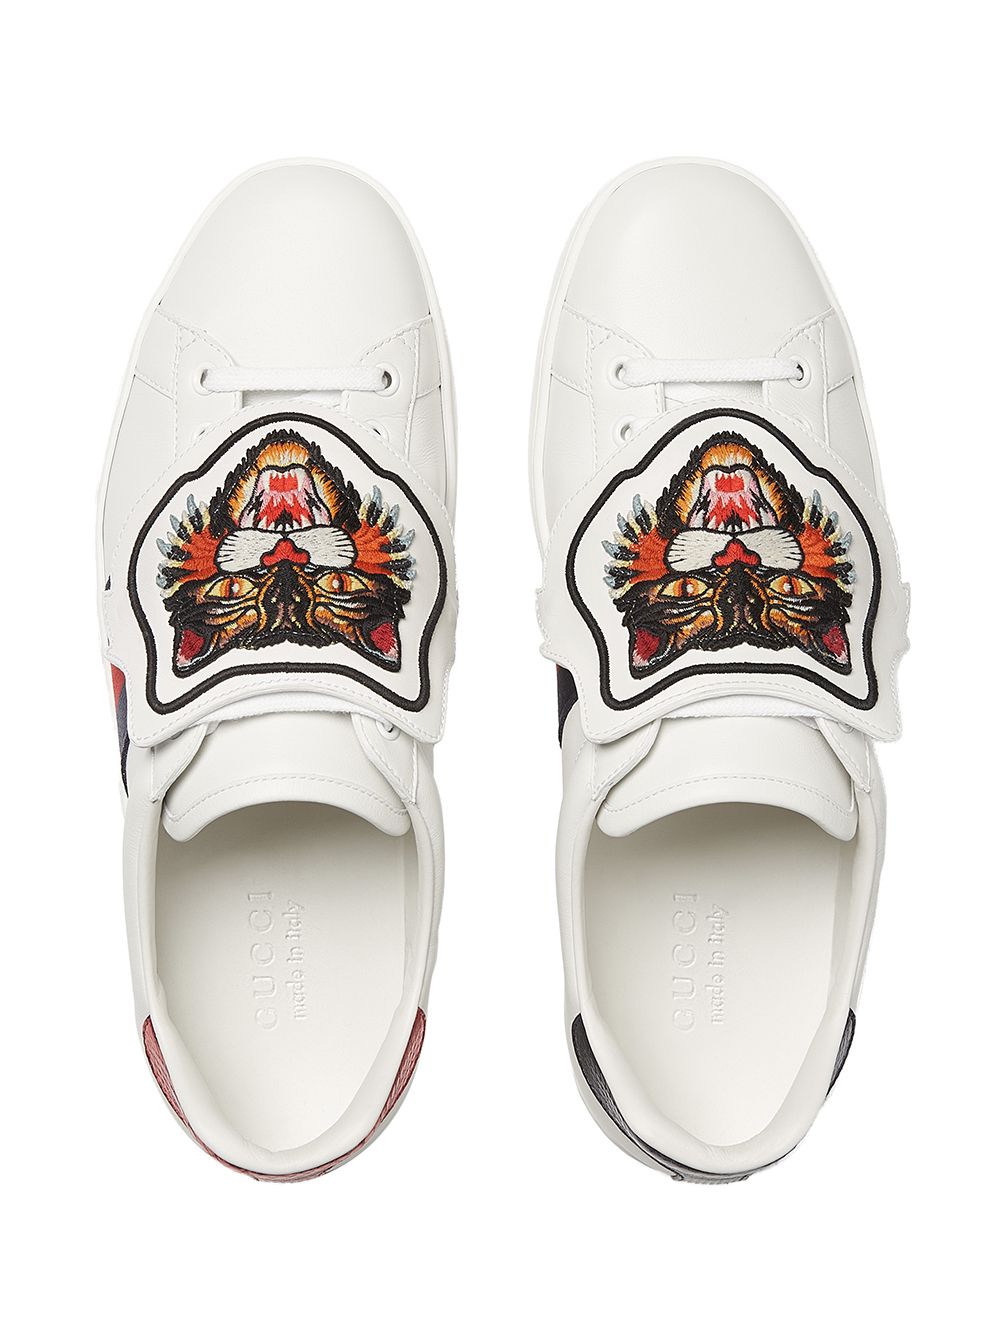 Gucci Ace Sneaker With Removable Embroideries | Farfetch.com